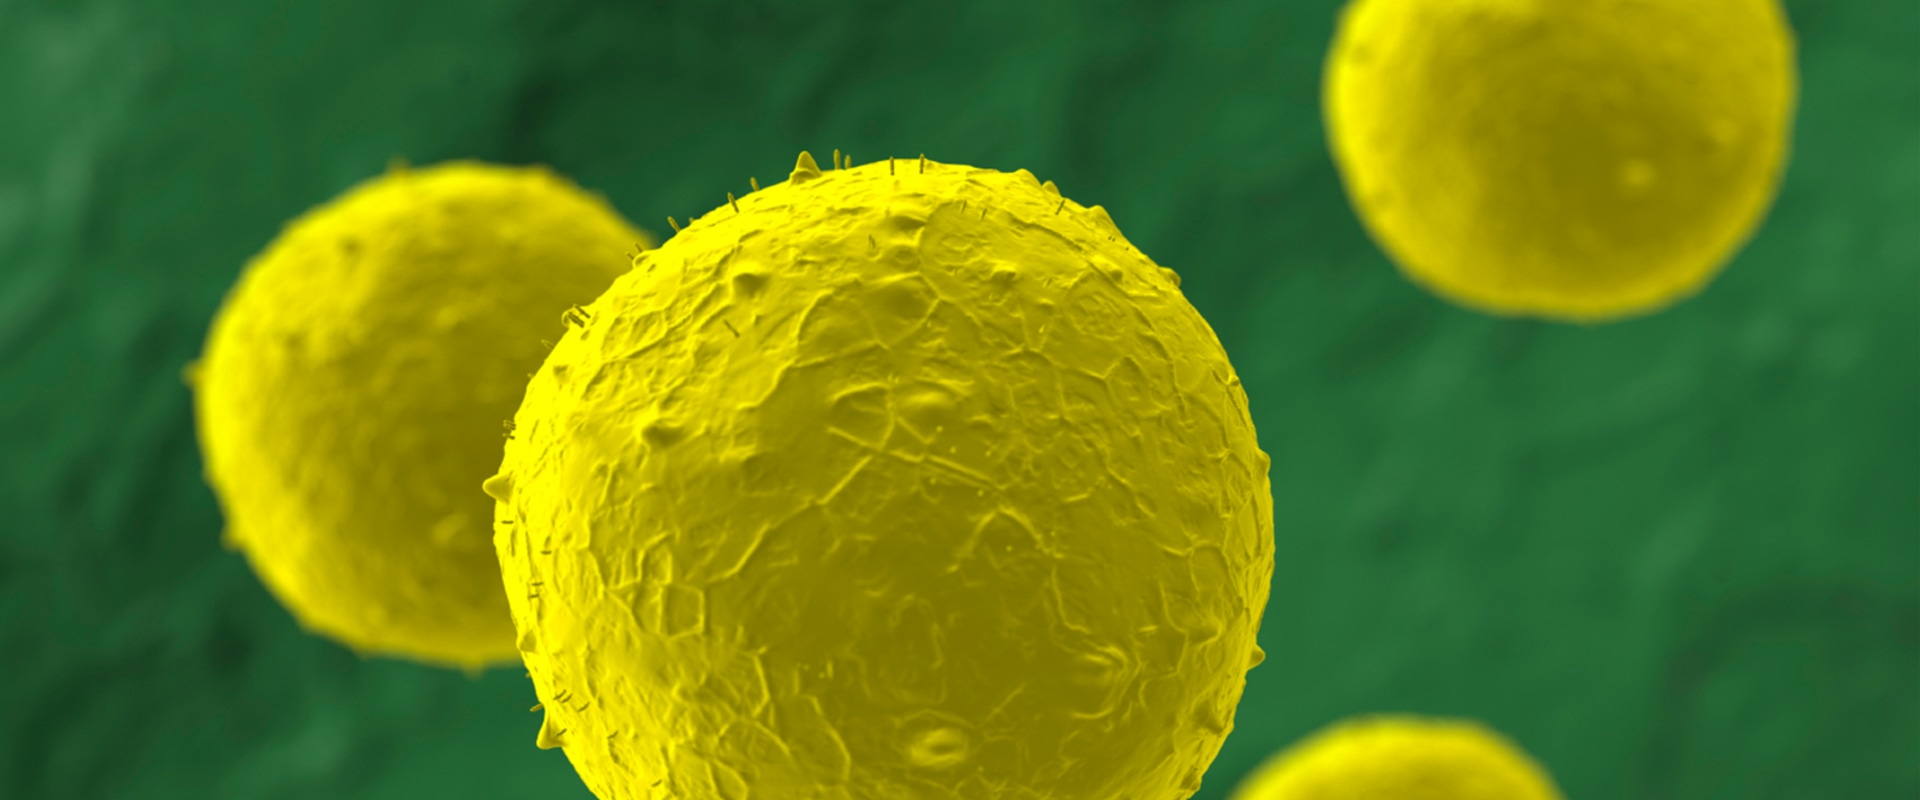 Which stem cell therapies are fda approved?